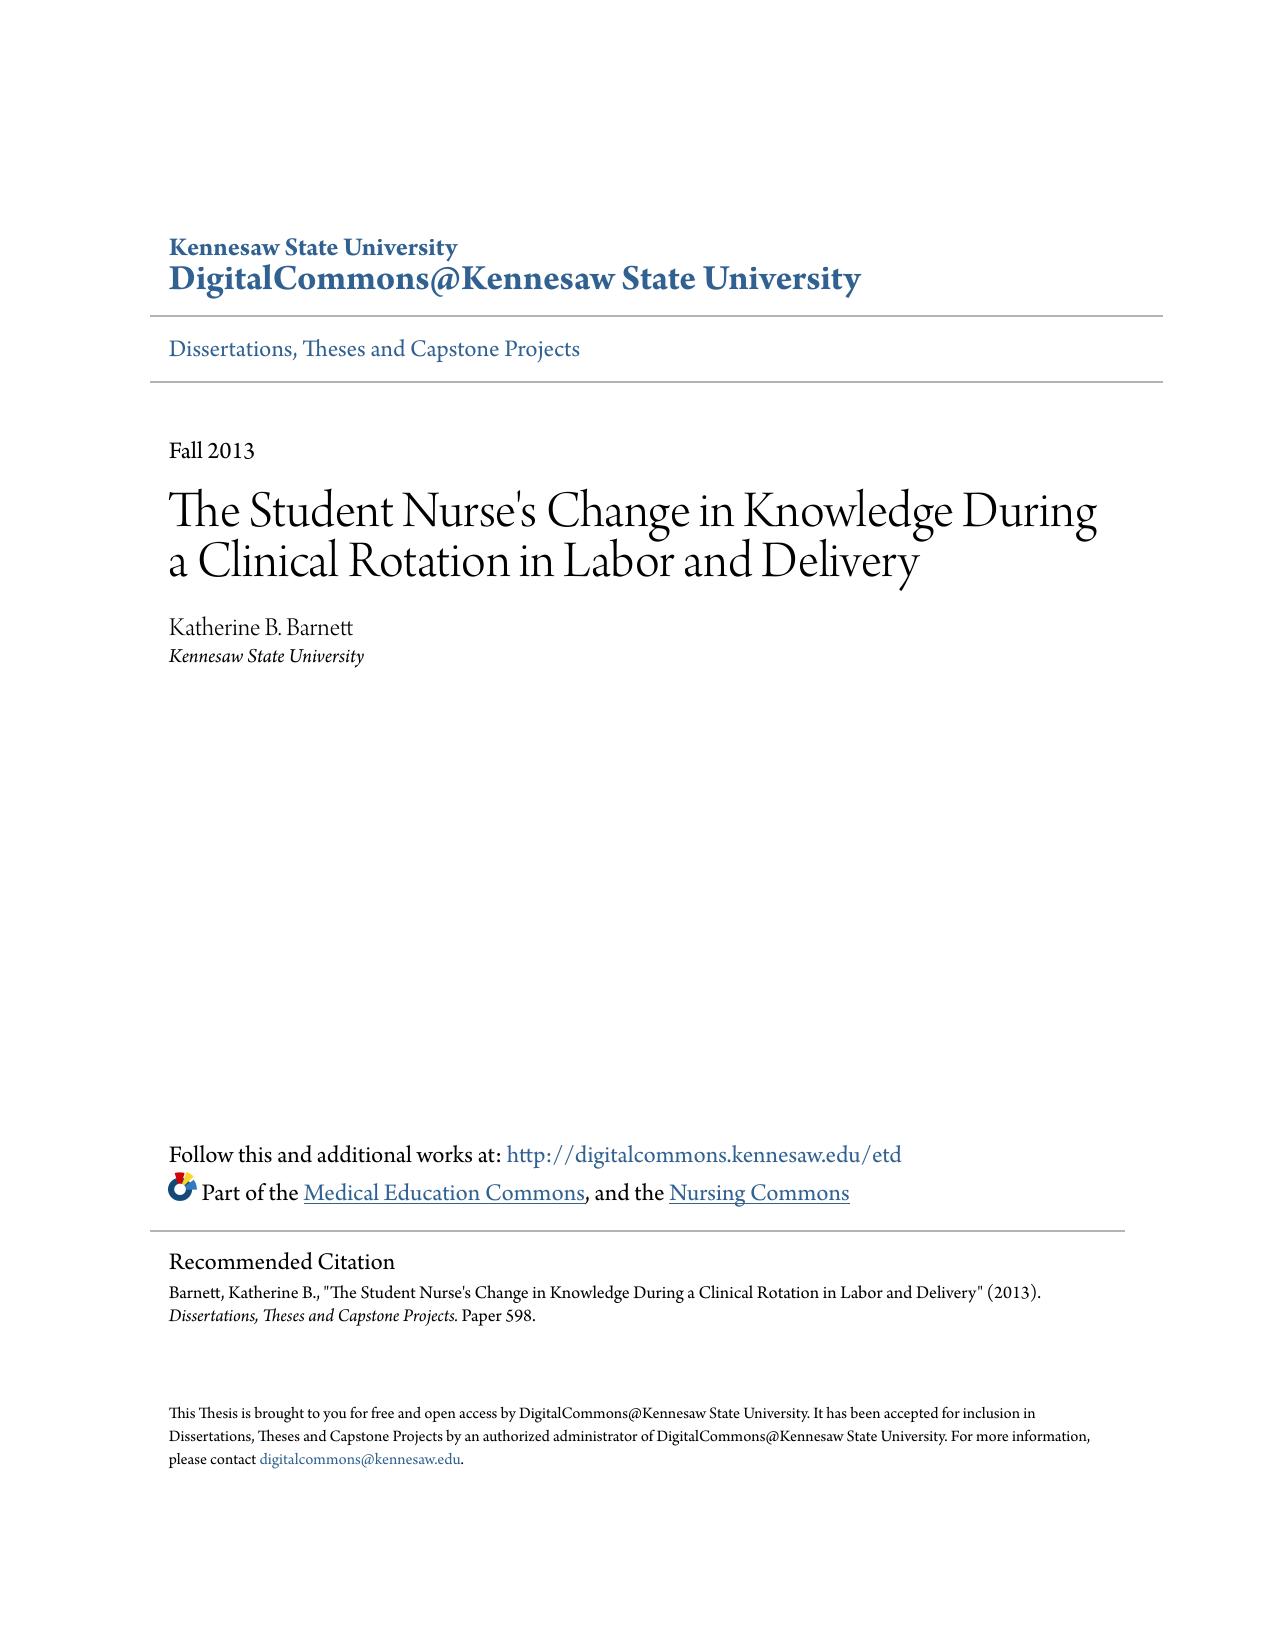 The Student Nurse's Change in Knowledge During a Clinical Rotation in Labor and Delivery